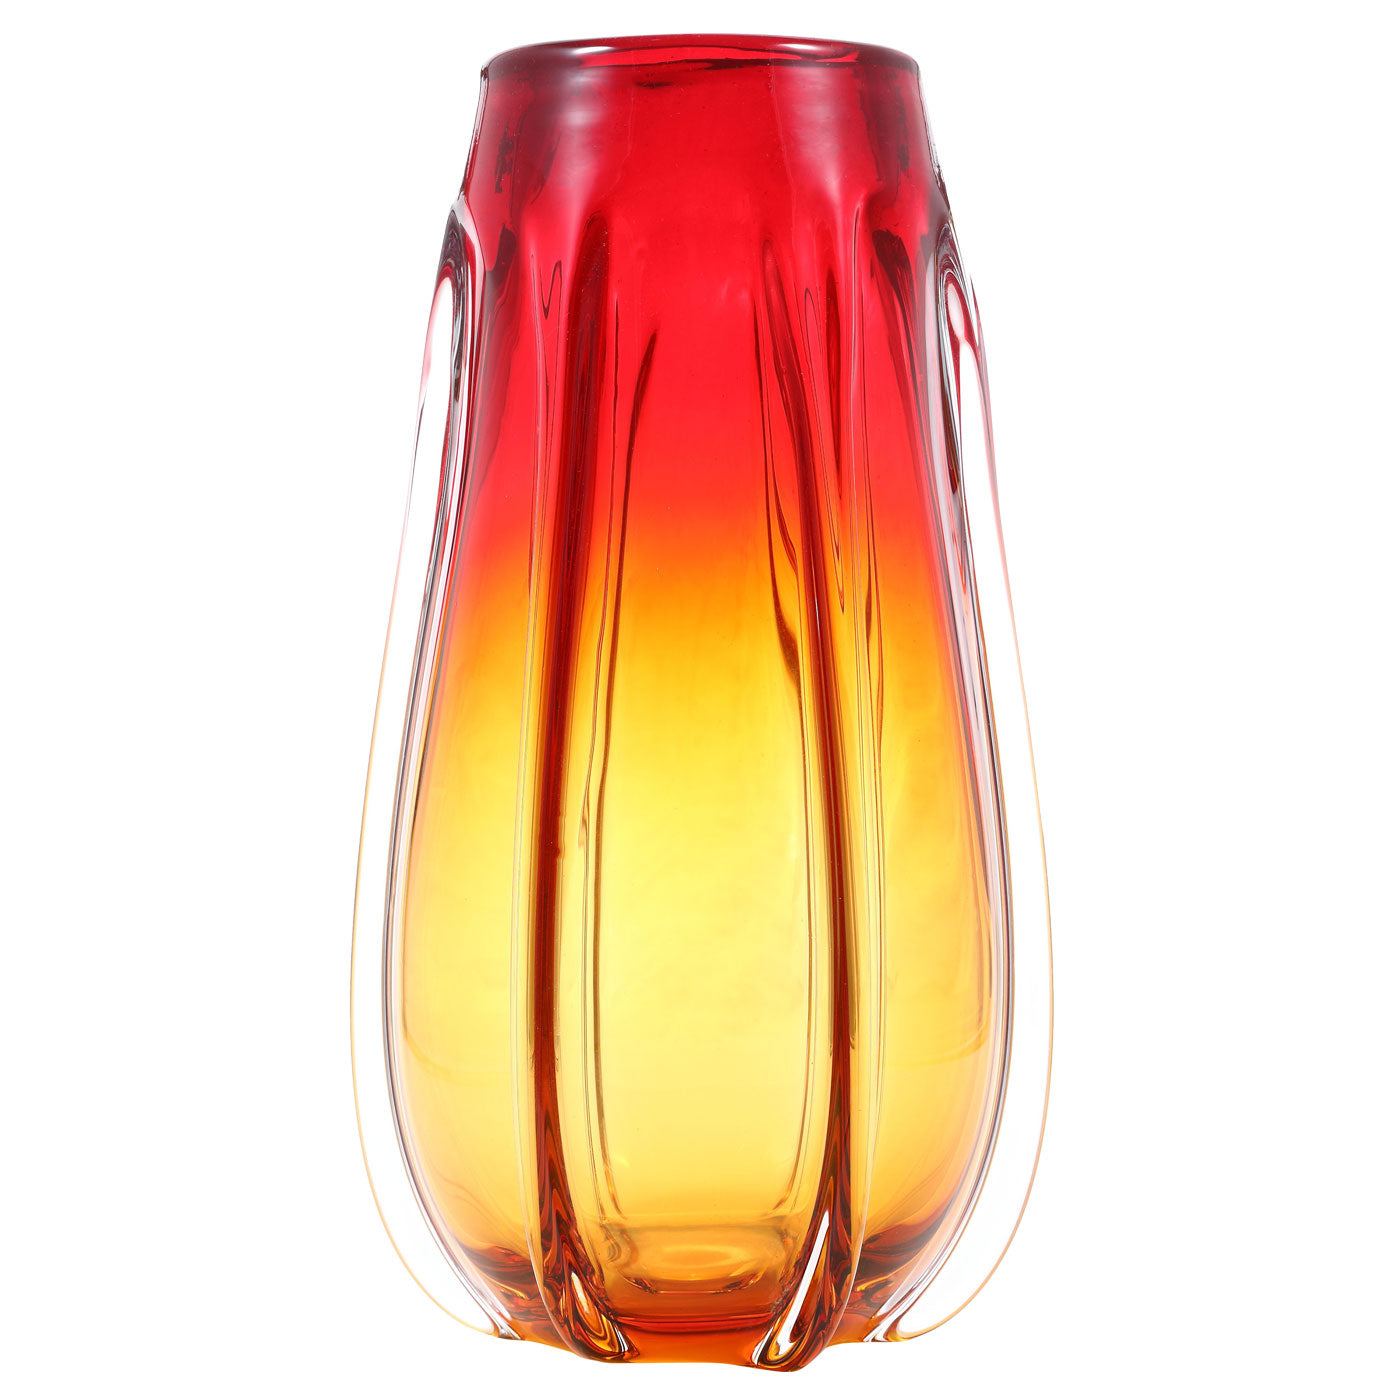 Hand Blown Laine Art Glass Vase - Gold & Red Ombre 10-12.5 inch tall